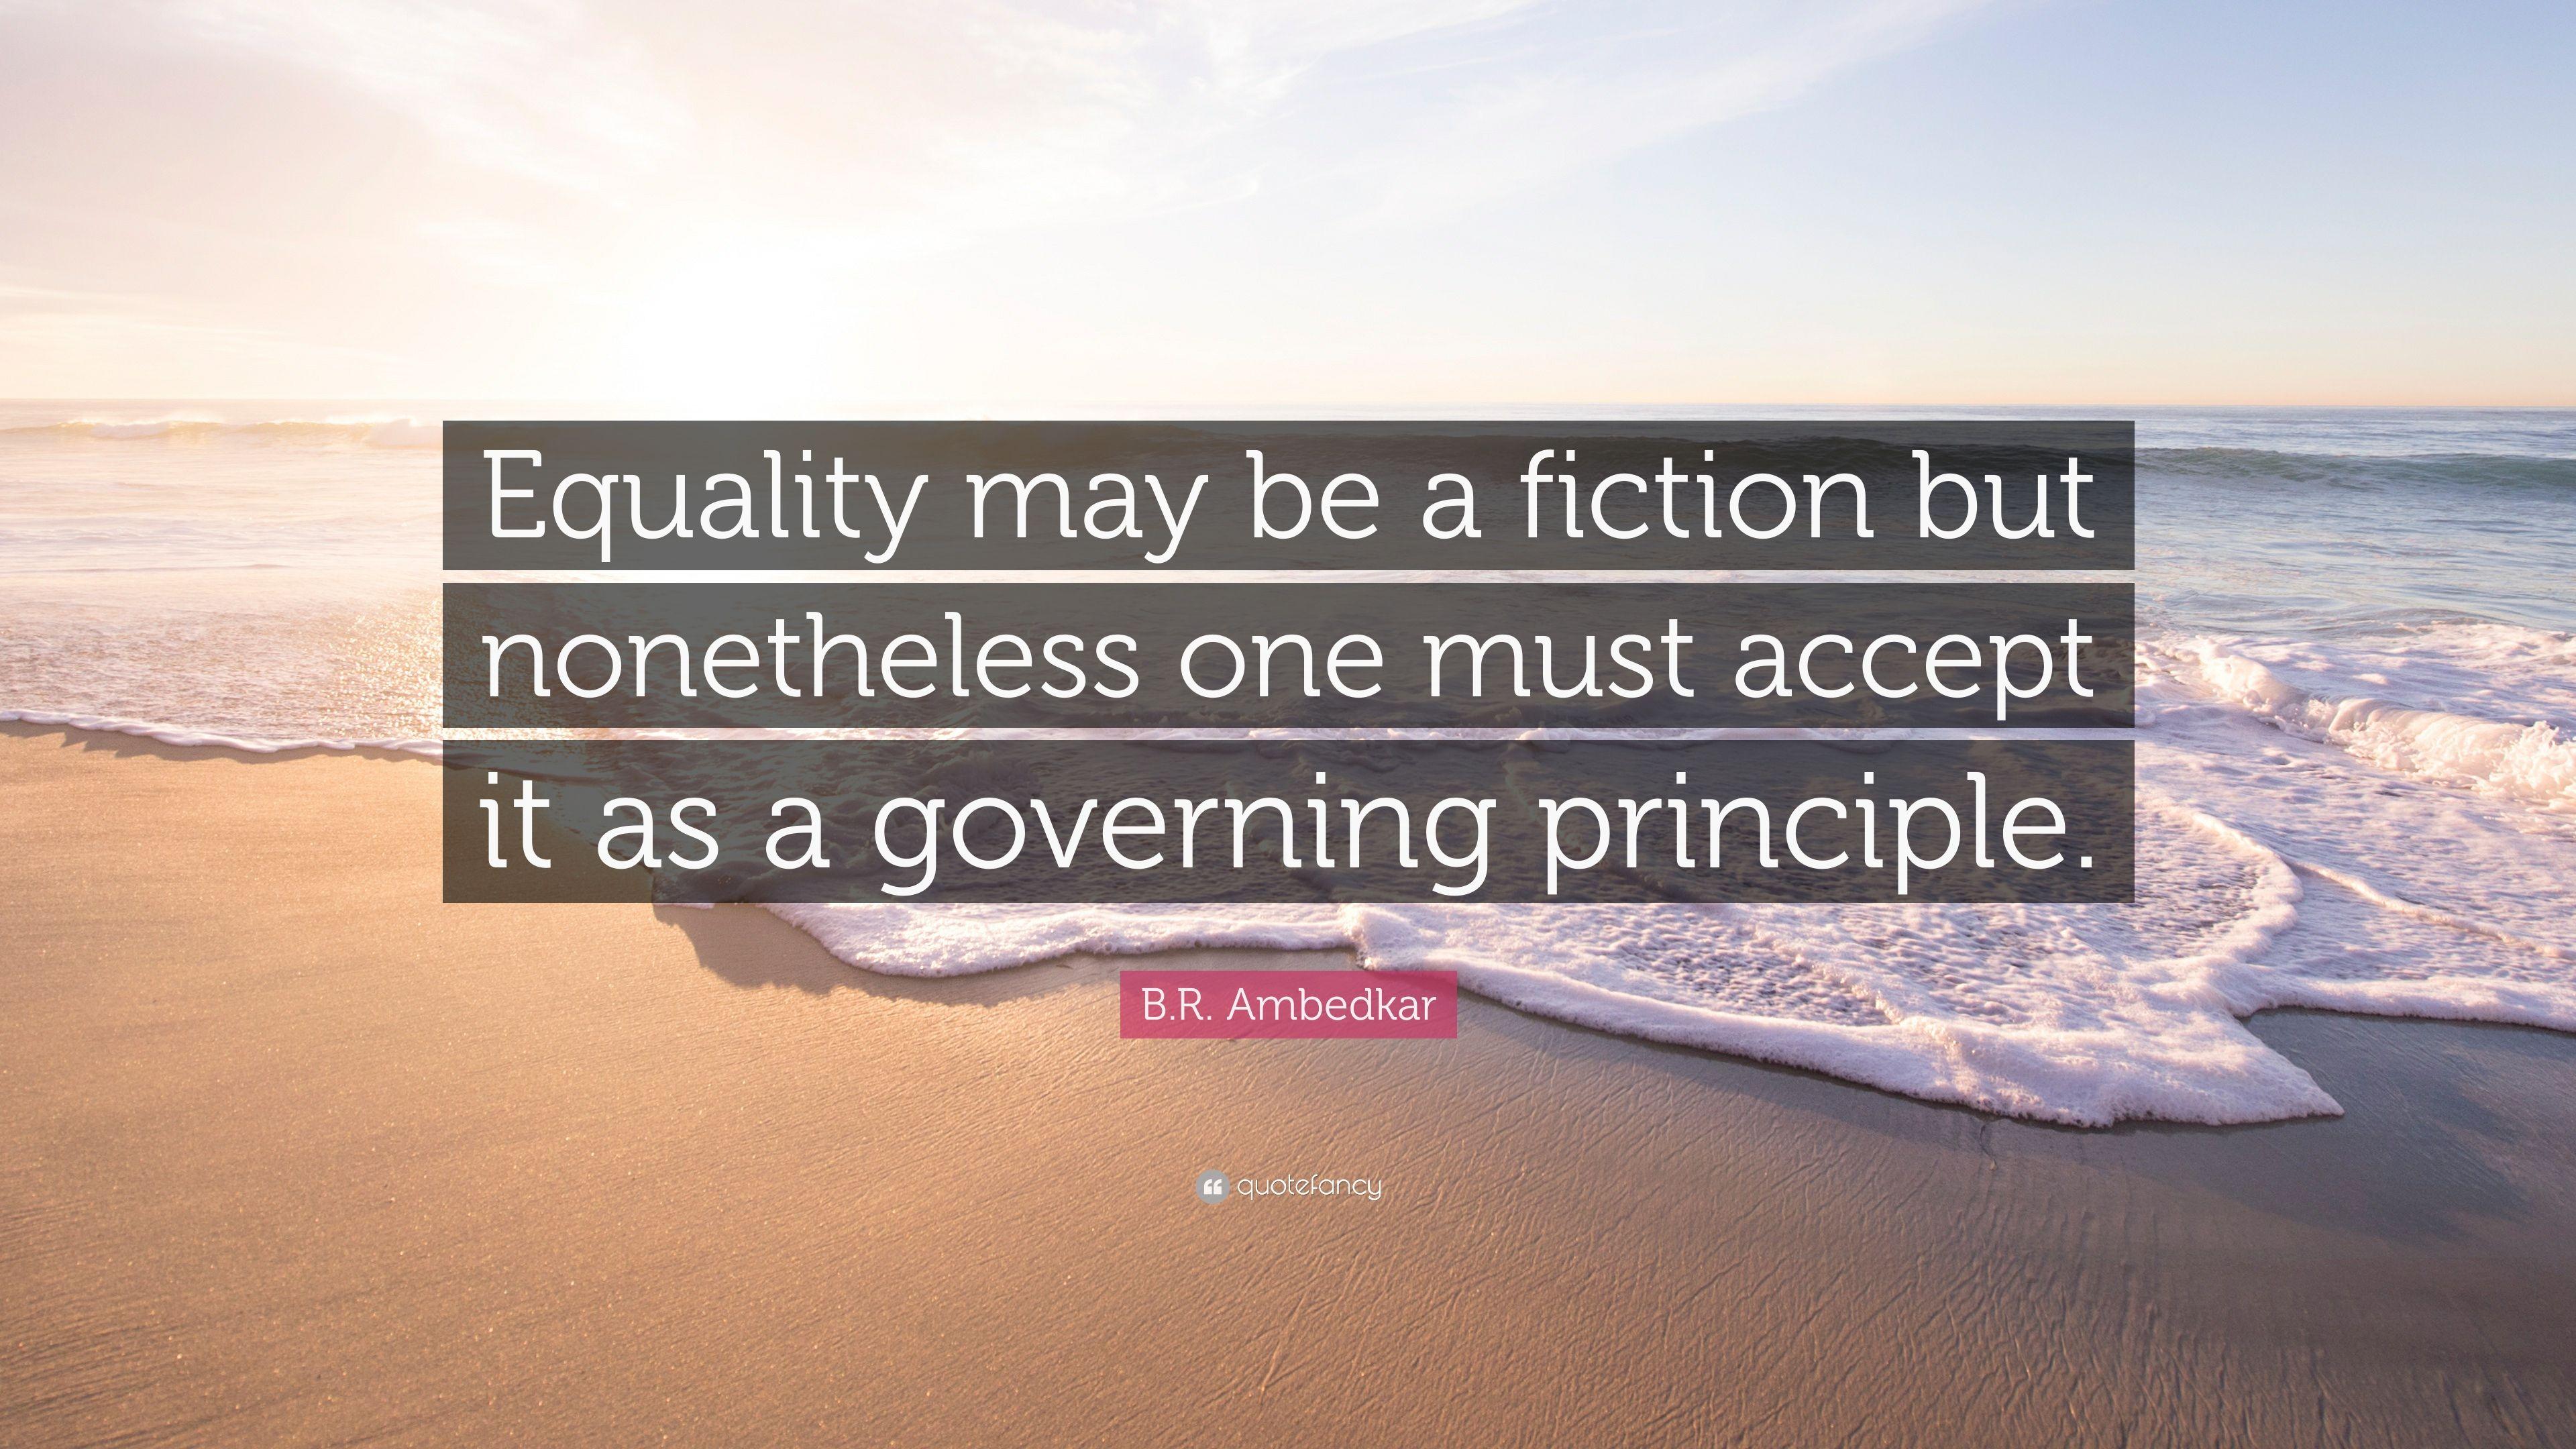 B.R. Ambedkar Quote: “Equality may be a fiction but nonetheless one